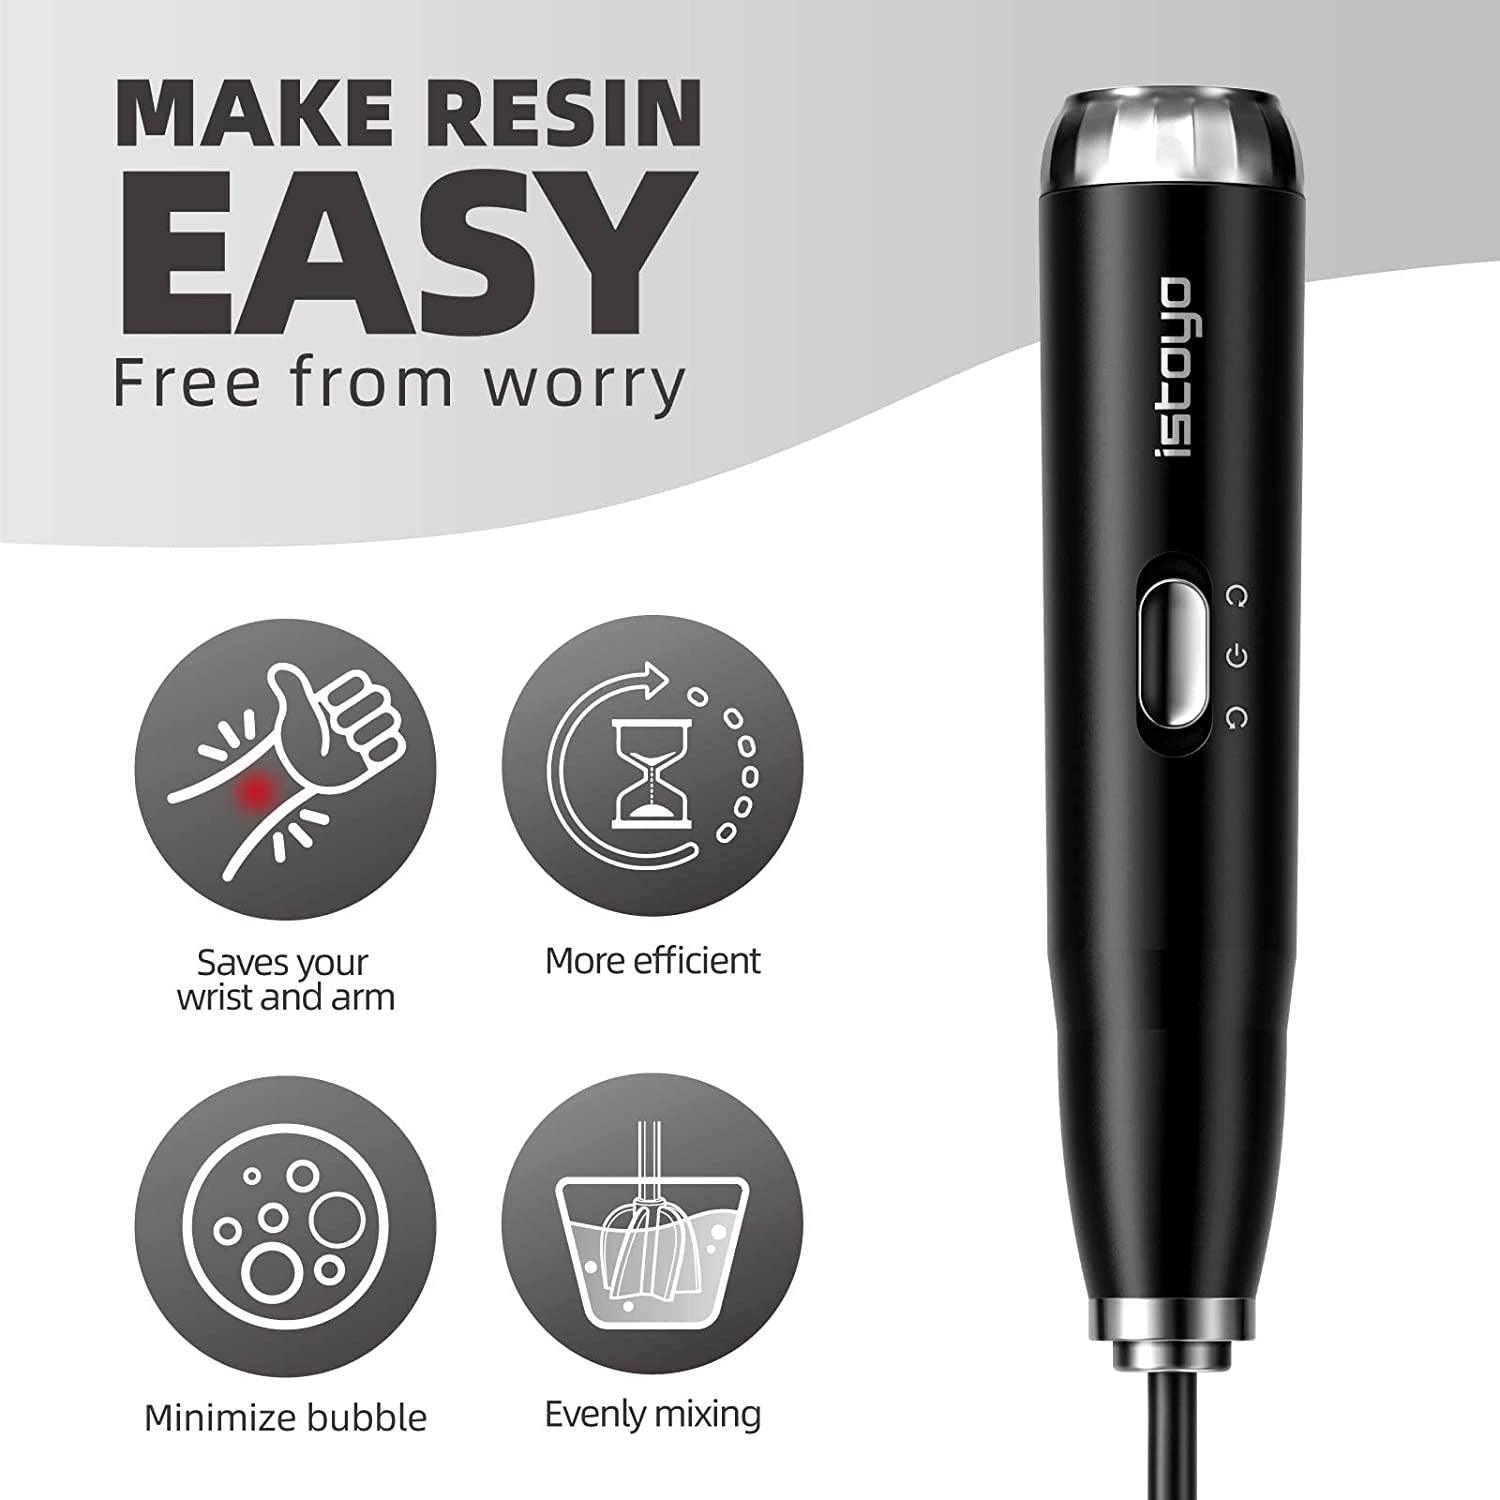 Premium Resin Mixer, Handheld Battery Epoxy Mixer for Saving Your Wrist, Epoxy Resin Mixer Pro, Resin Stirrer for Resin, Resin Molds, Silicone Molds Mixing, DIY Crafts (Included 4 Pcs Paddles) - WoodArtSupply